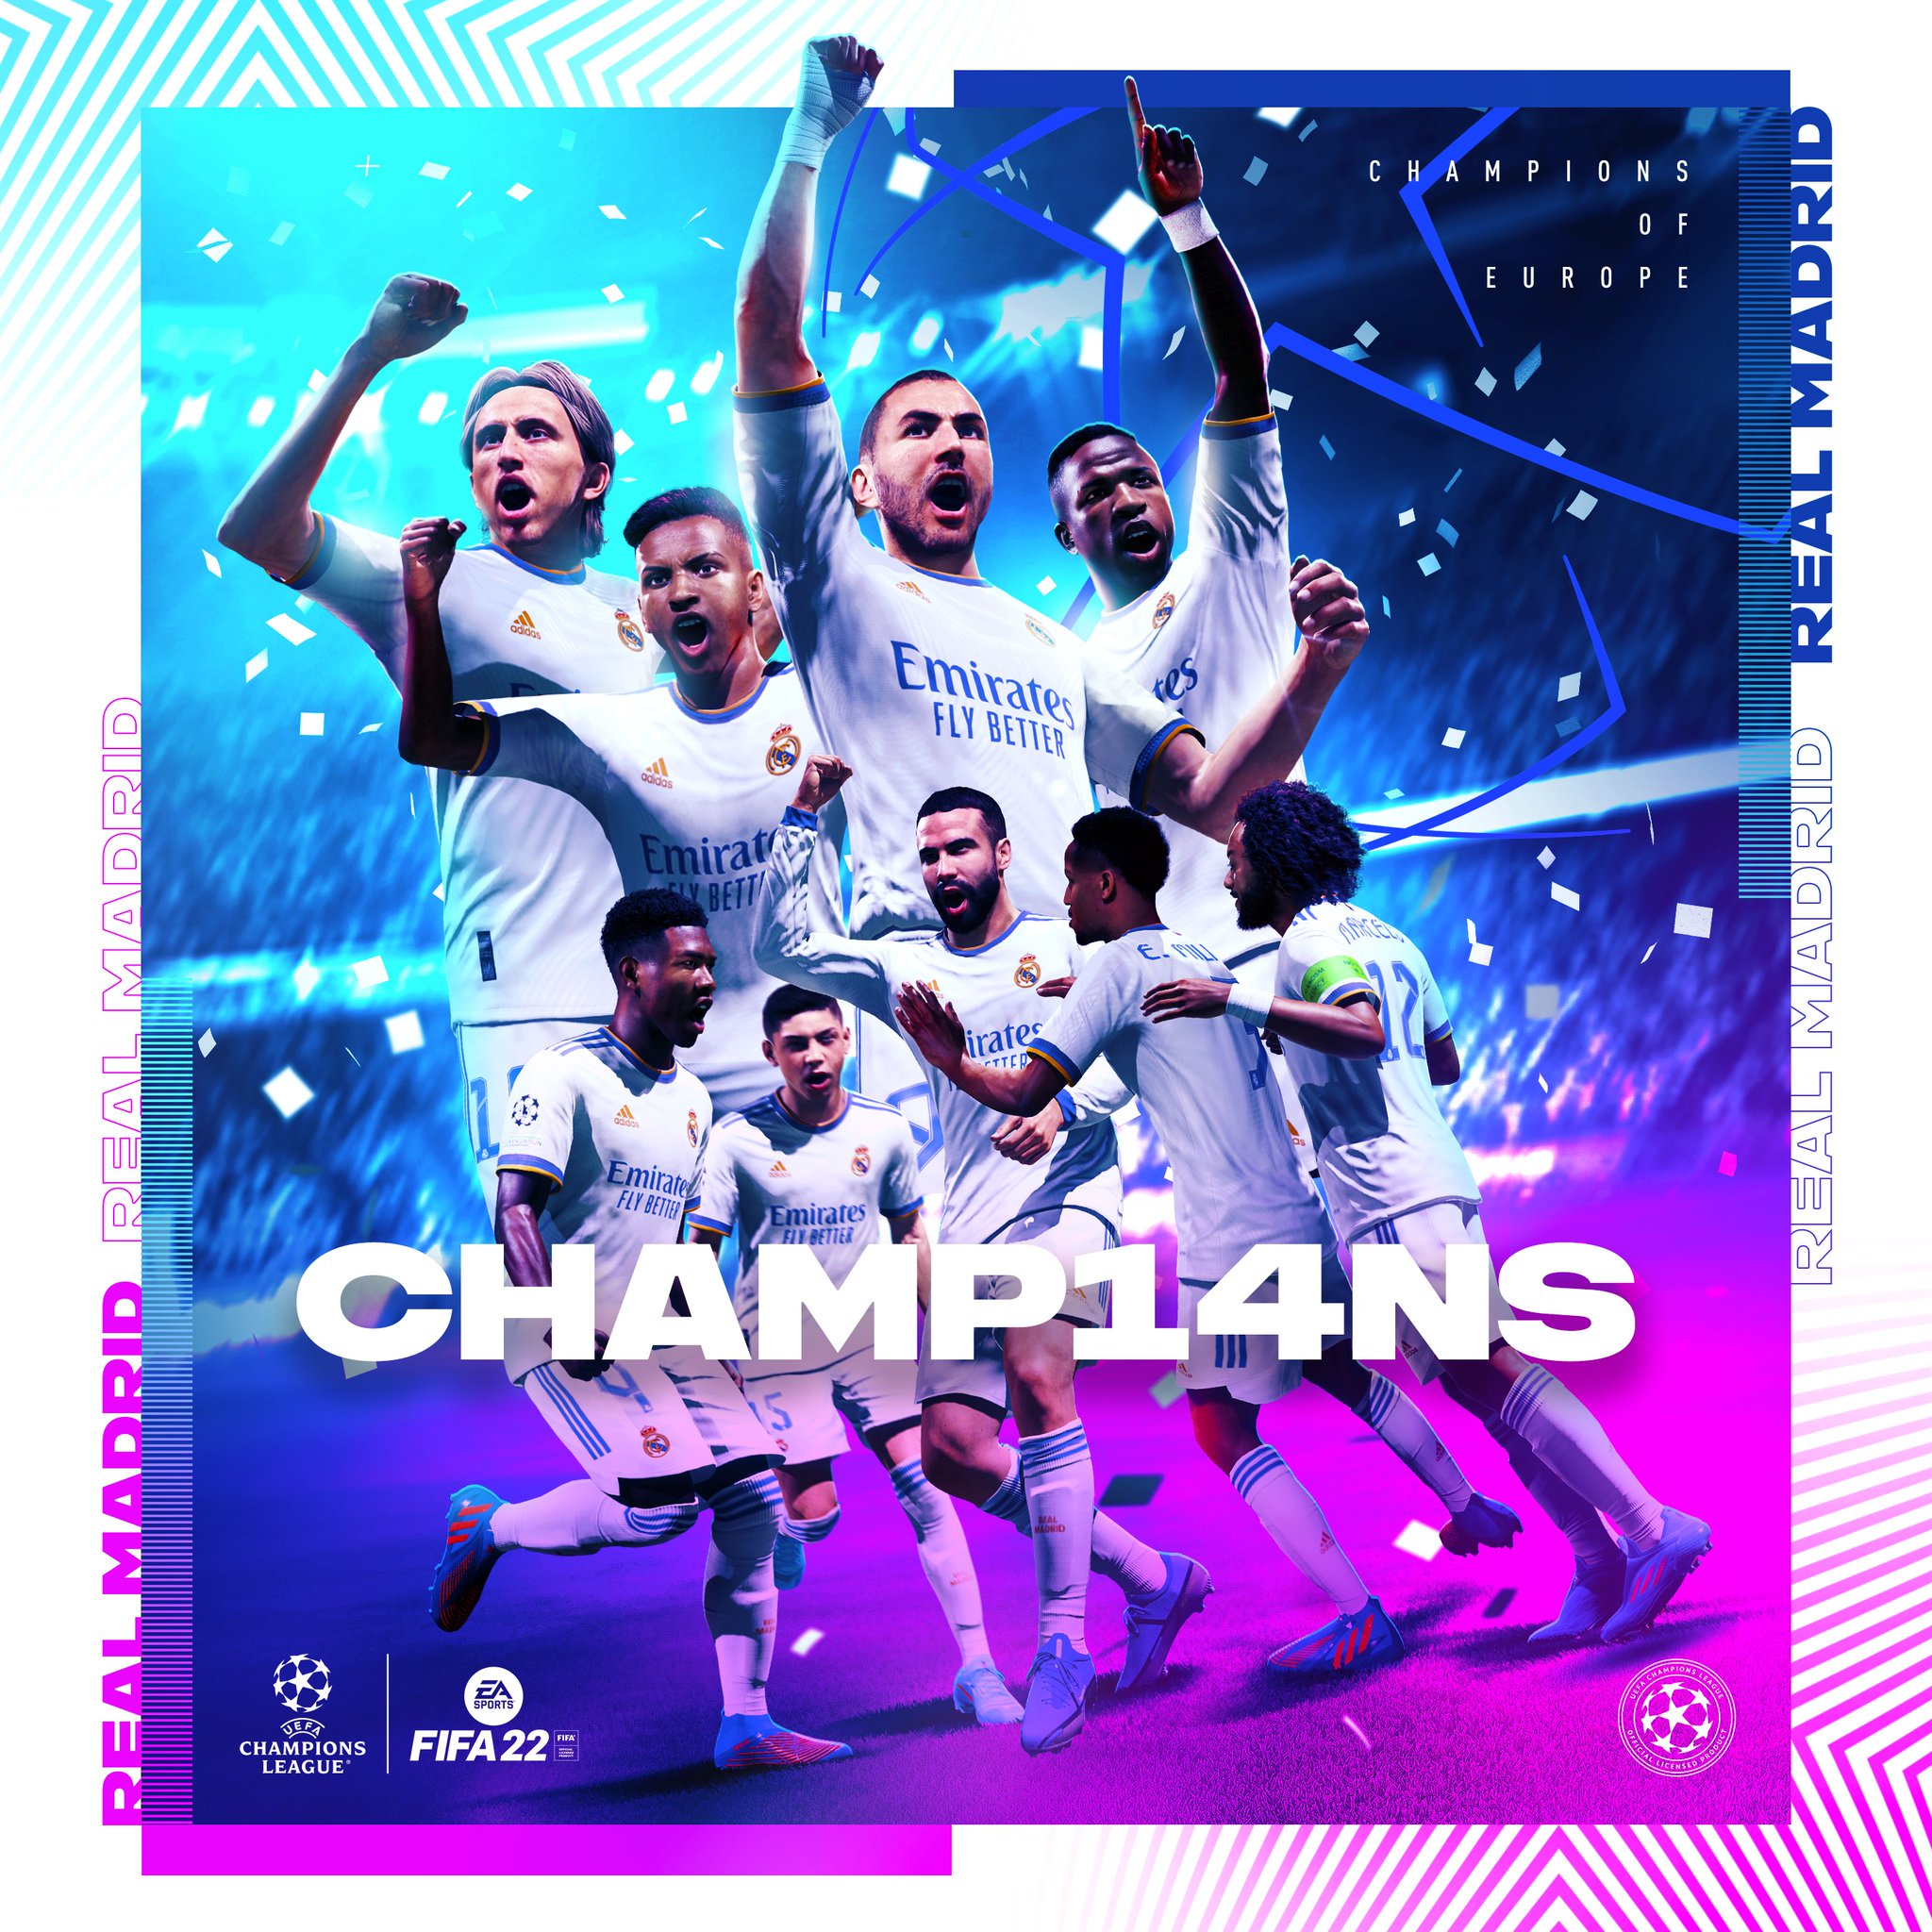 Real Madrid C.F. 🇫🇷 on X: 💫 ALLEZ REAL MADRID ! 🏆 #CHAMP14NS   / X